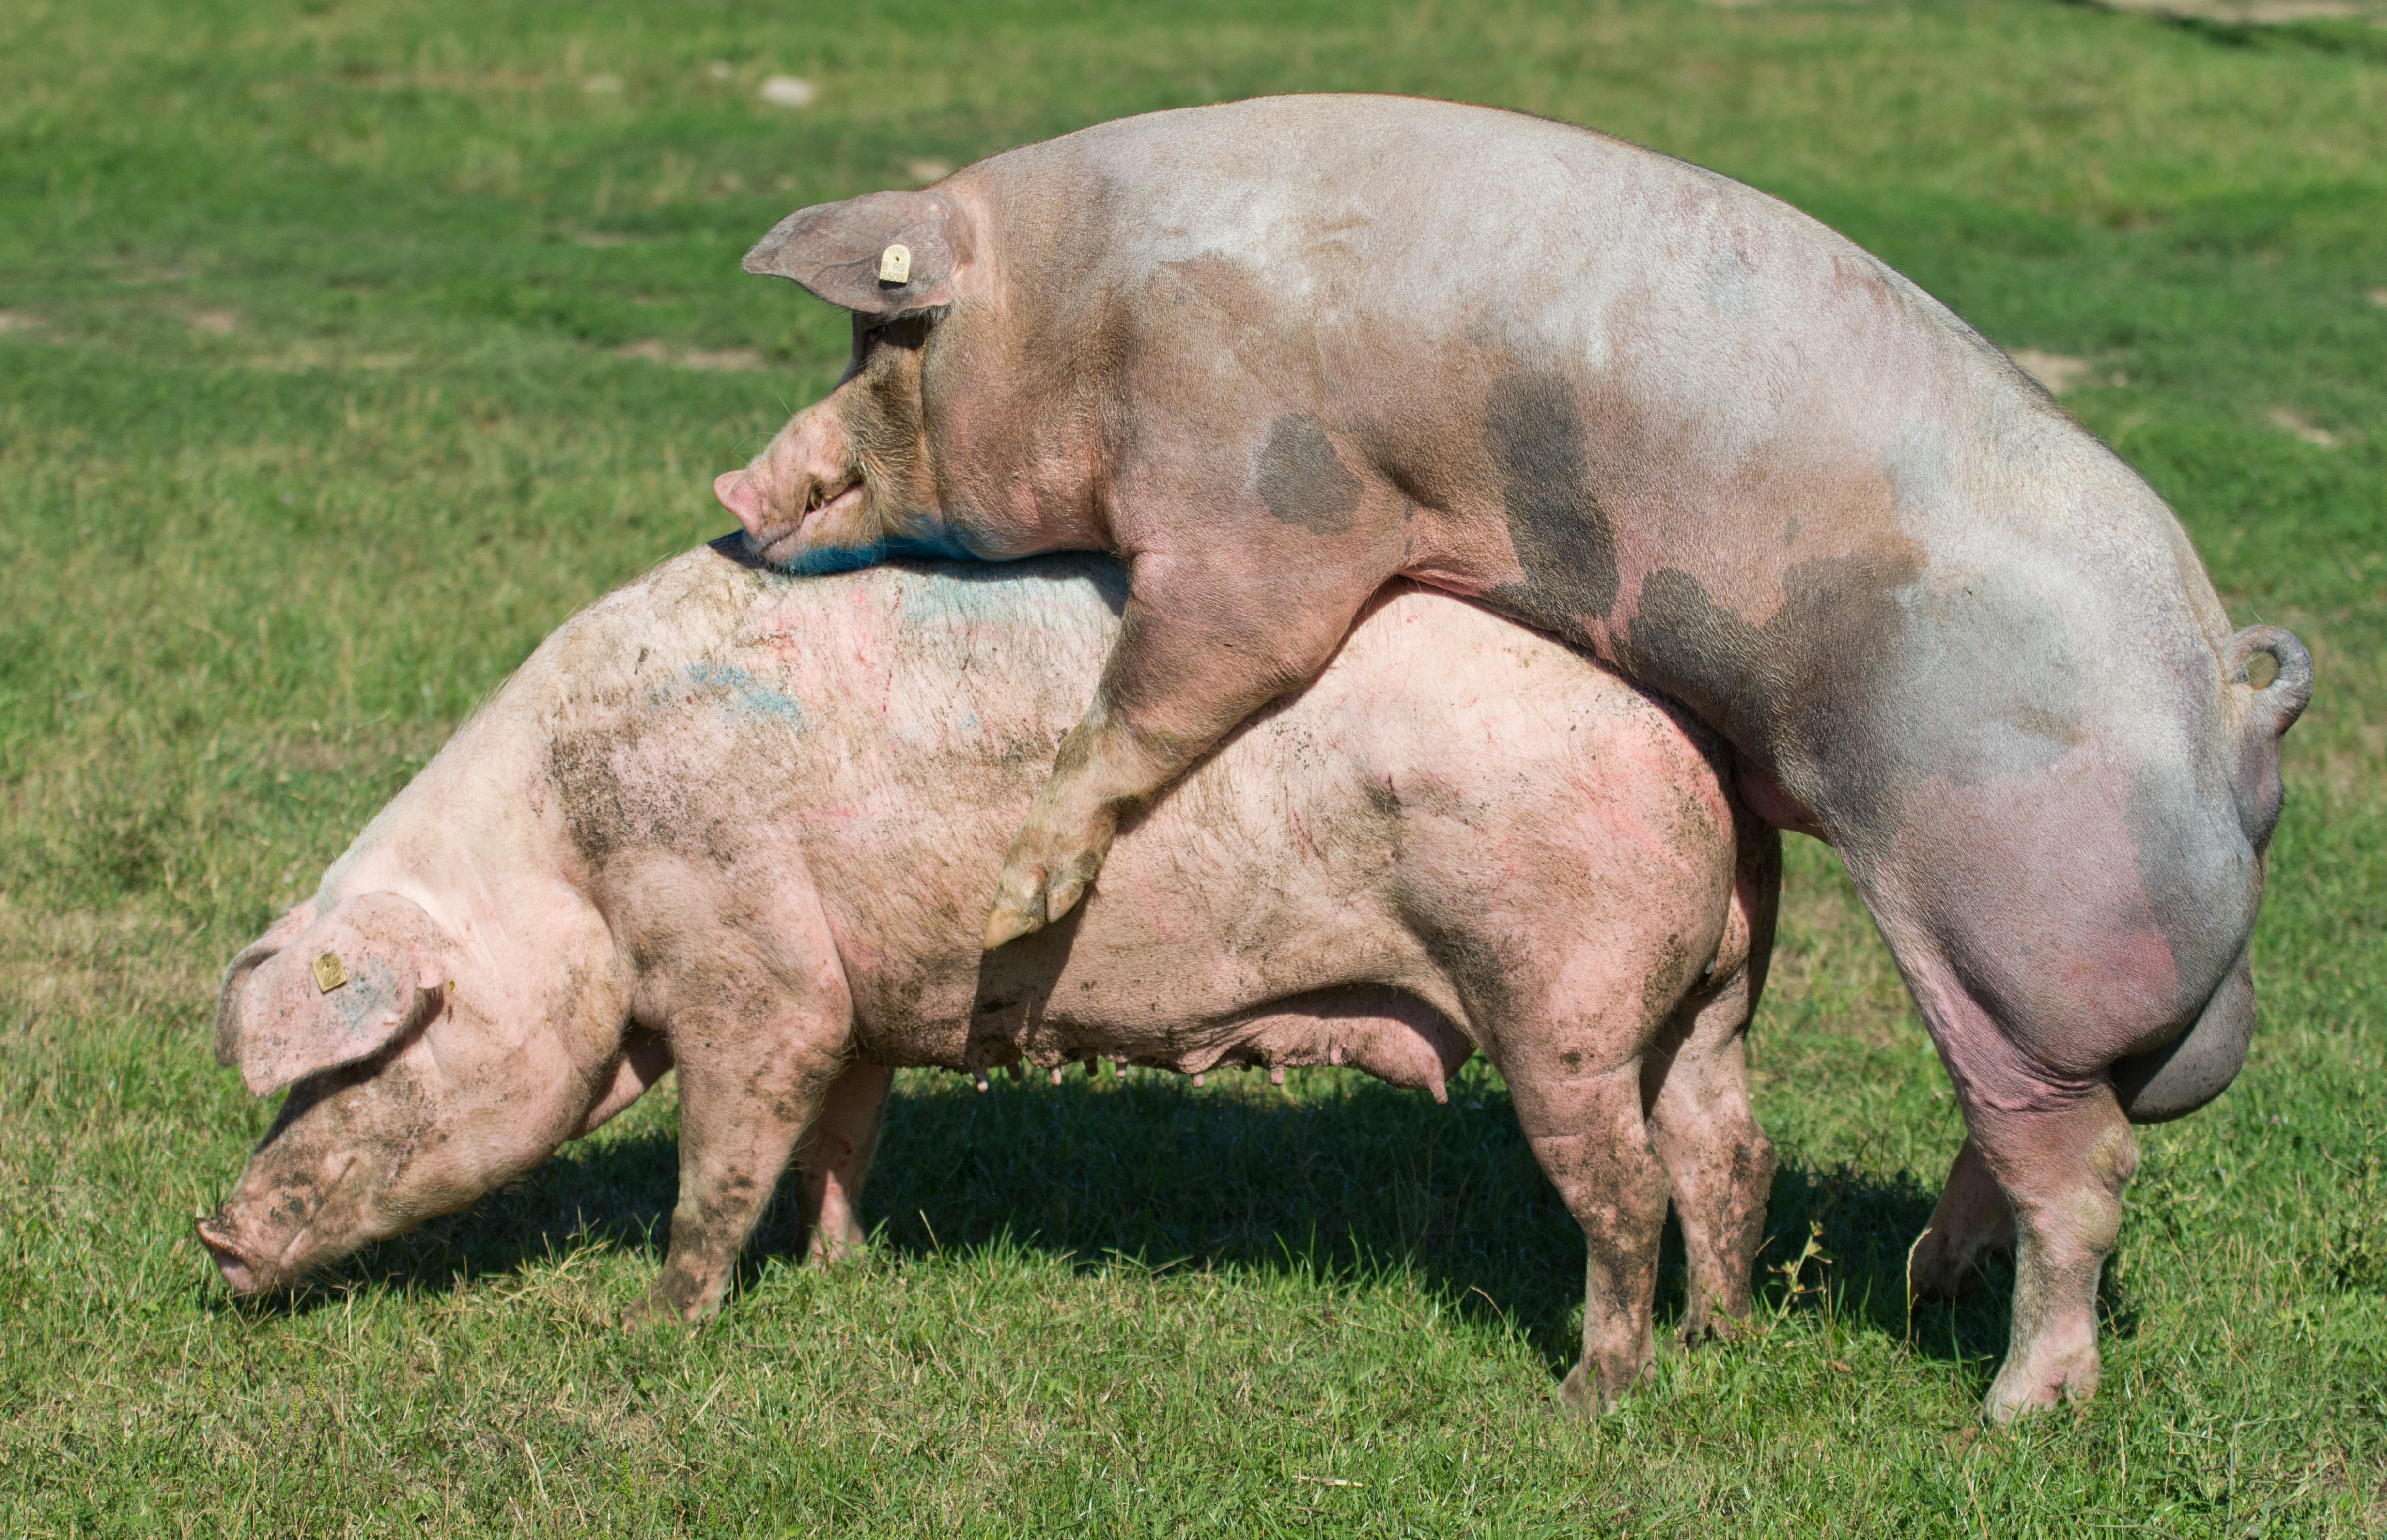 boar and sow mating outdoors on pasture